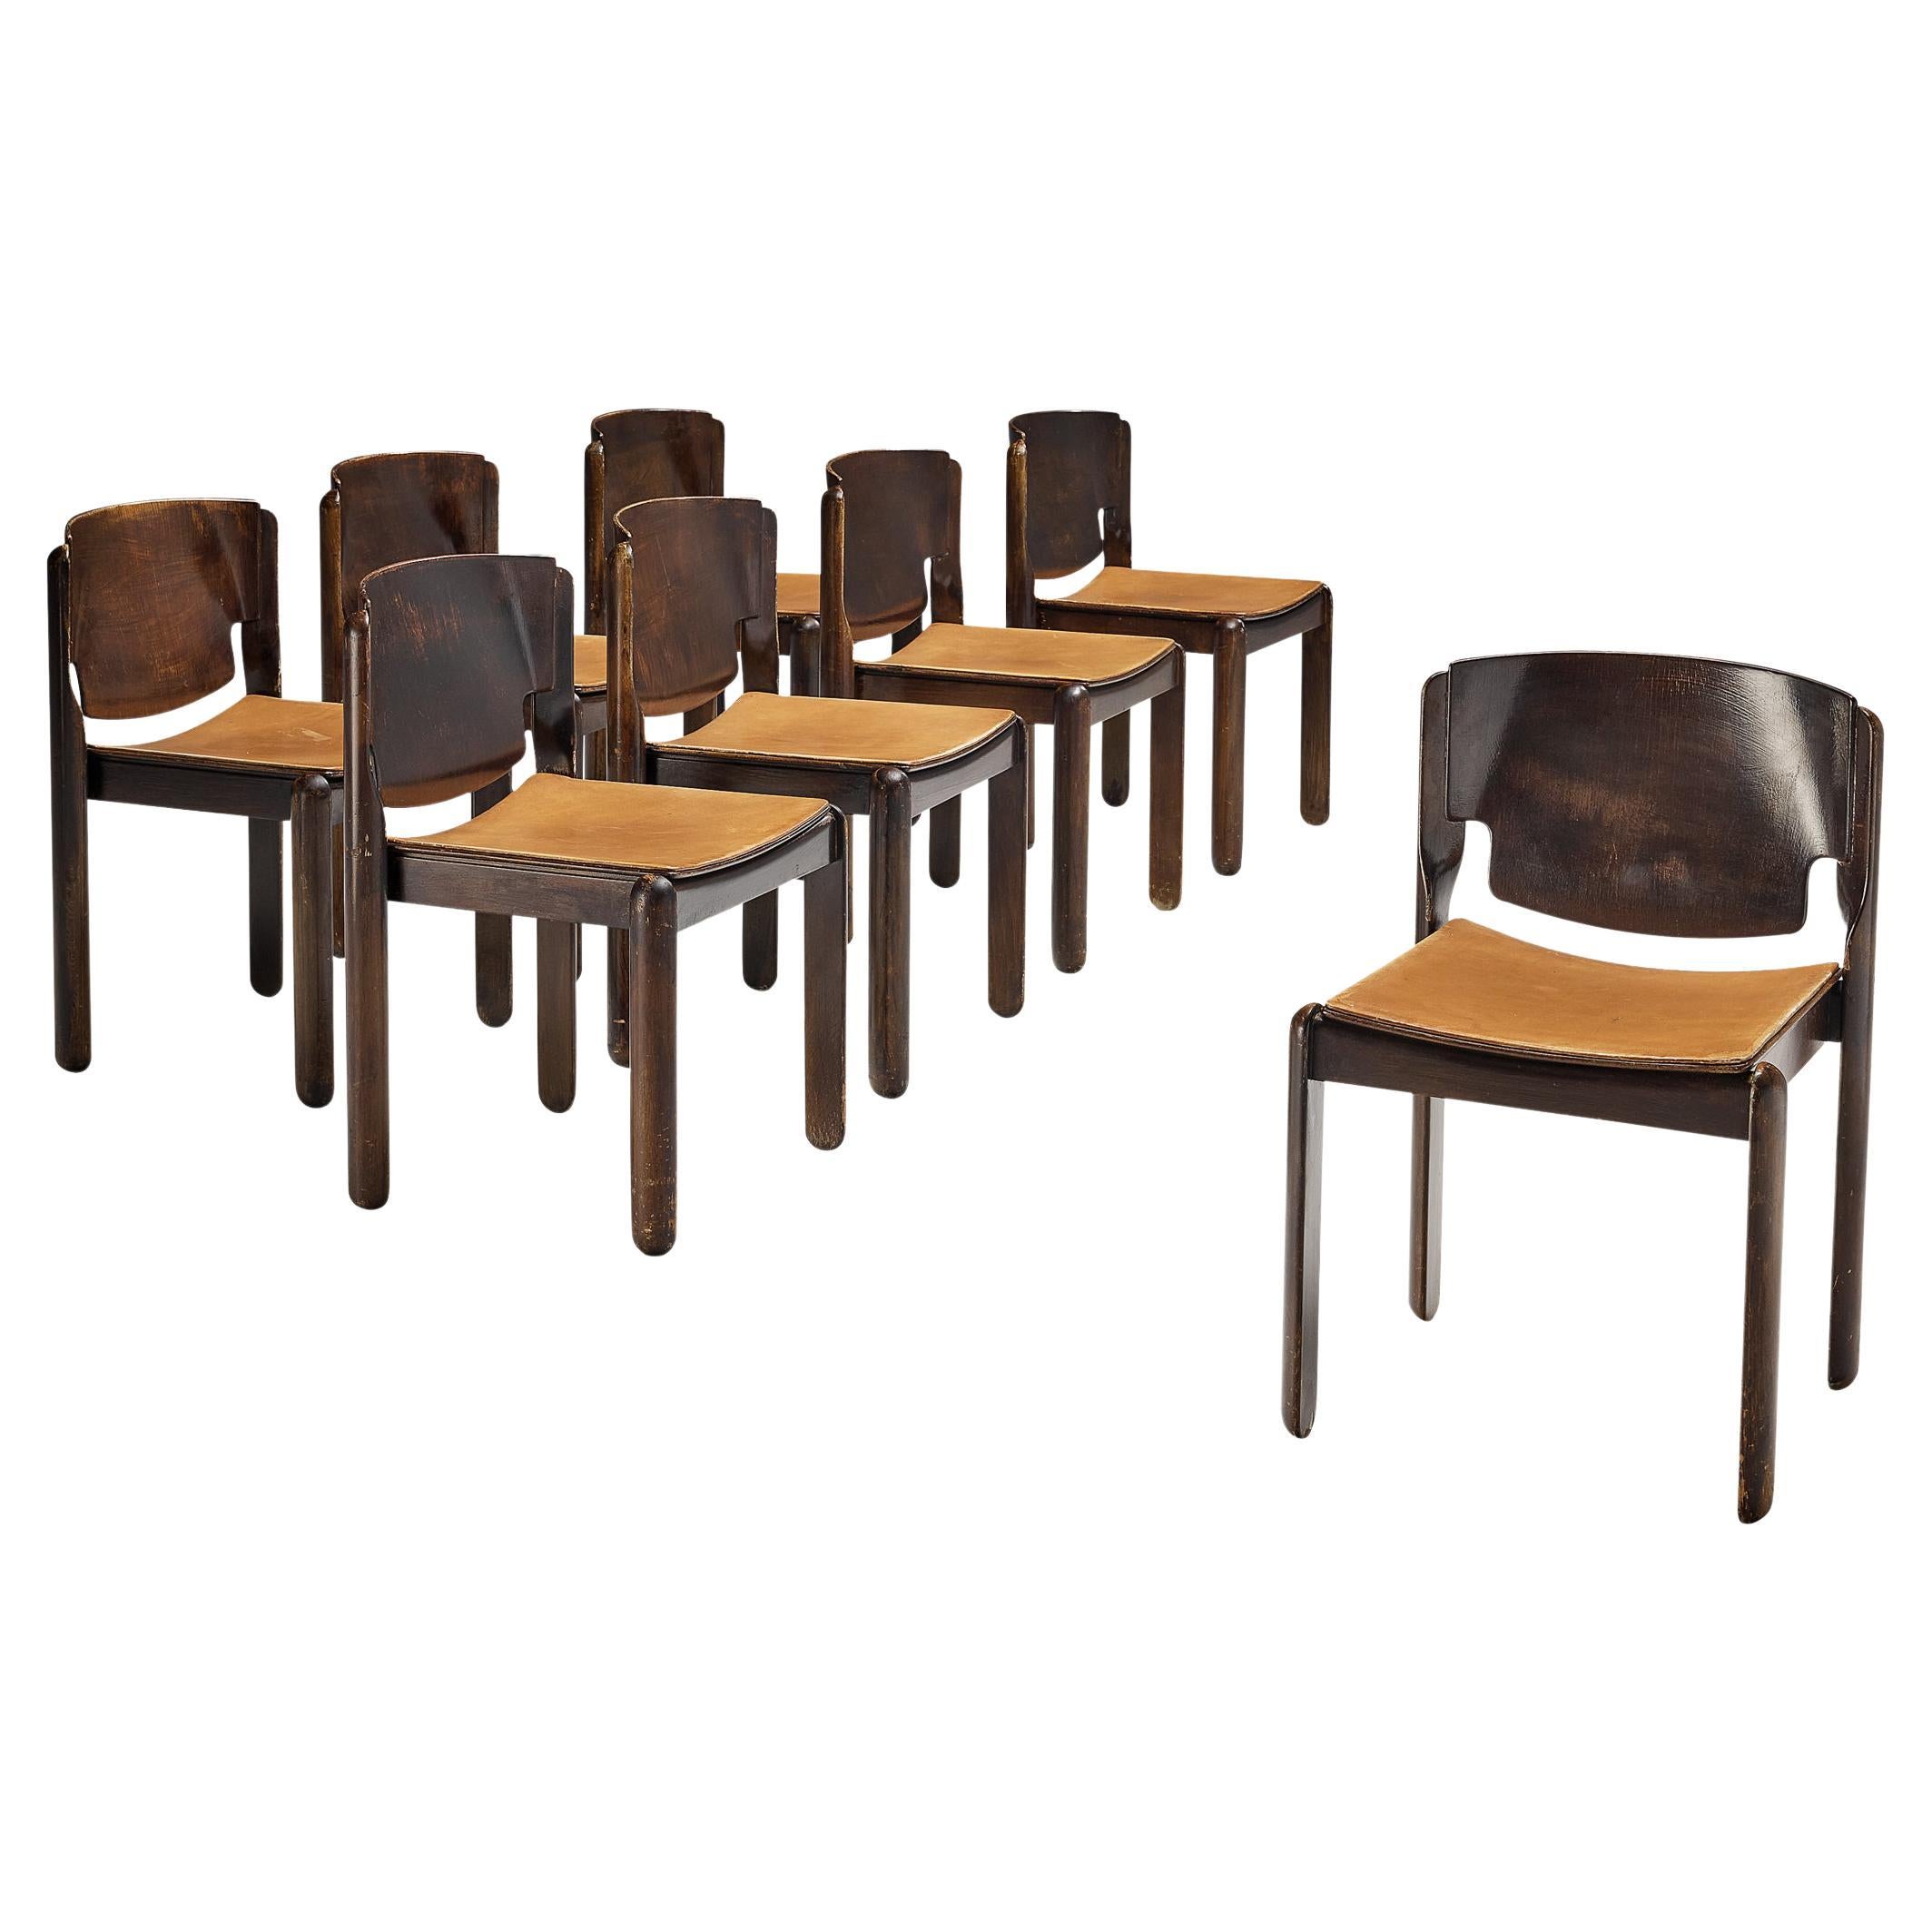 Vico Magistretti for Cassina Chairs with Cognac Leather